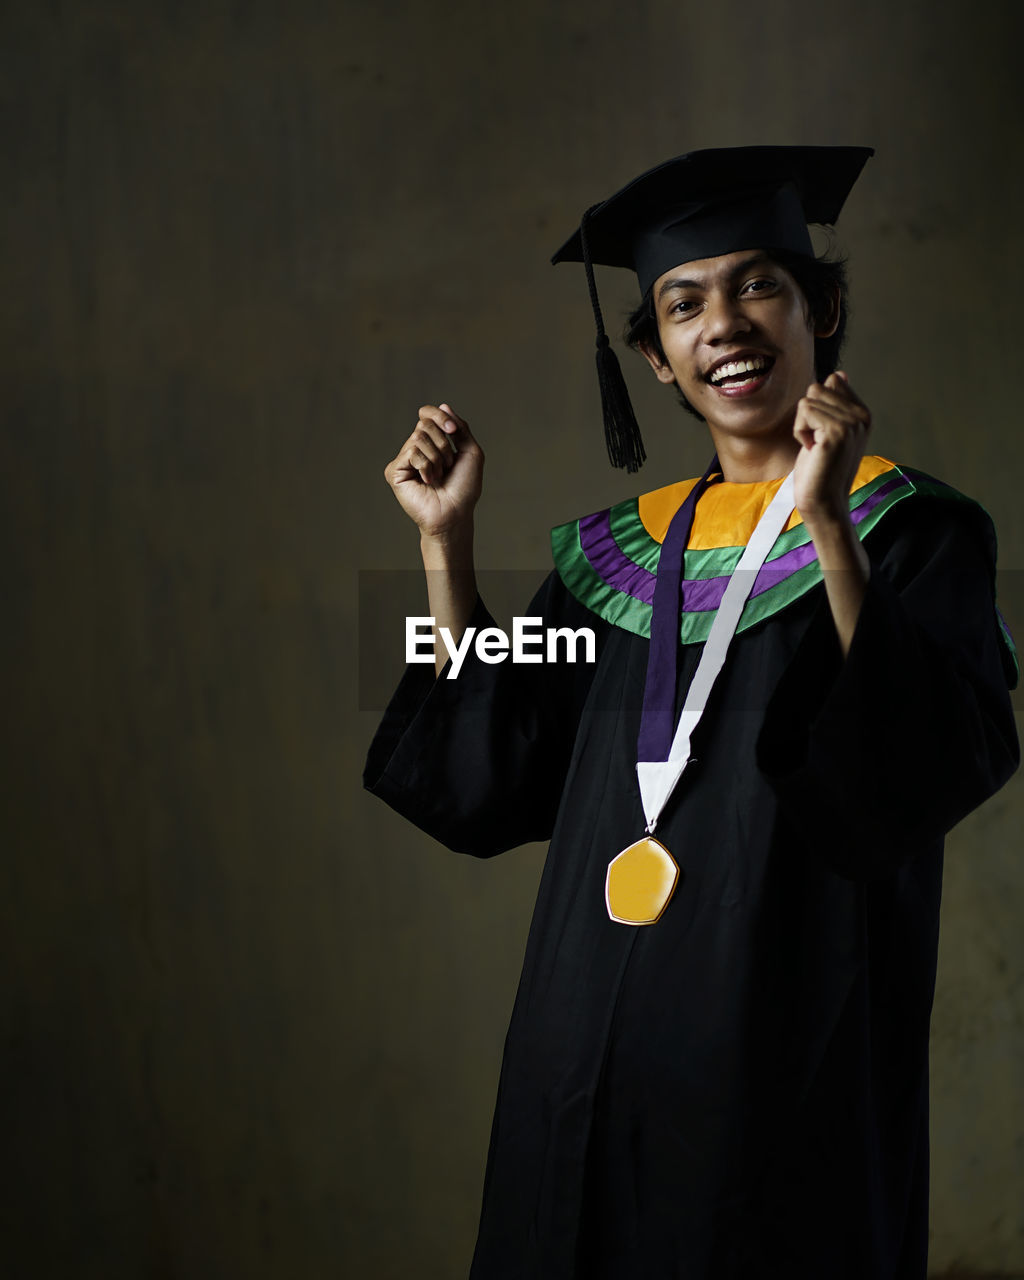 Portrait of smiling man wearing graduation gown standing against wall